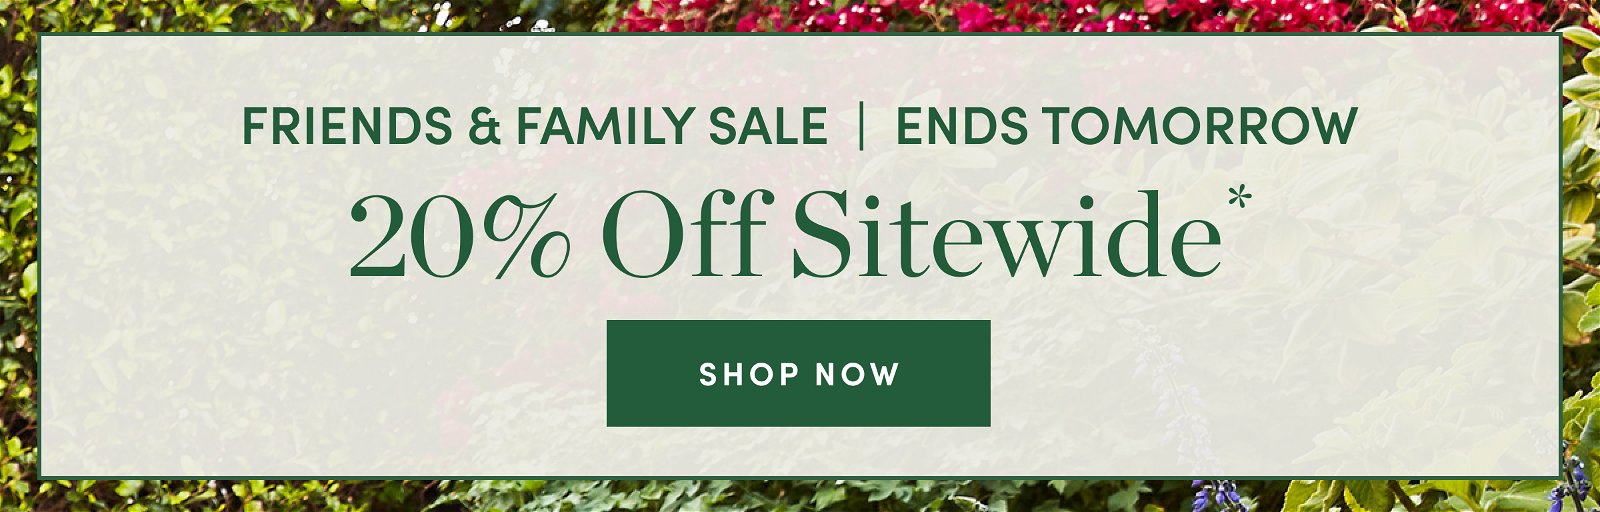 20 Percent Off Sitewide